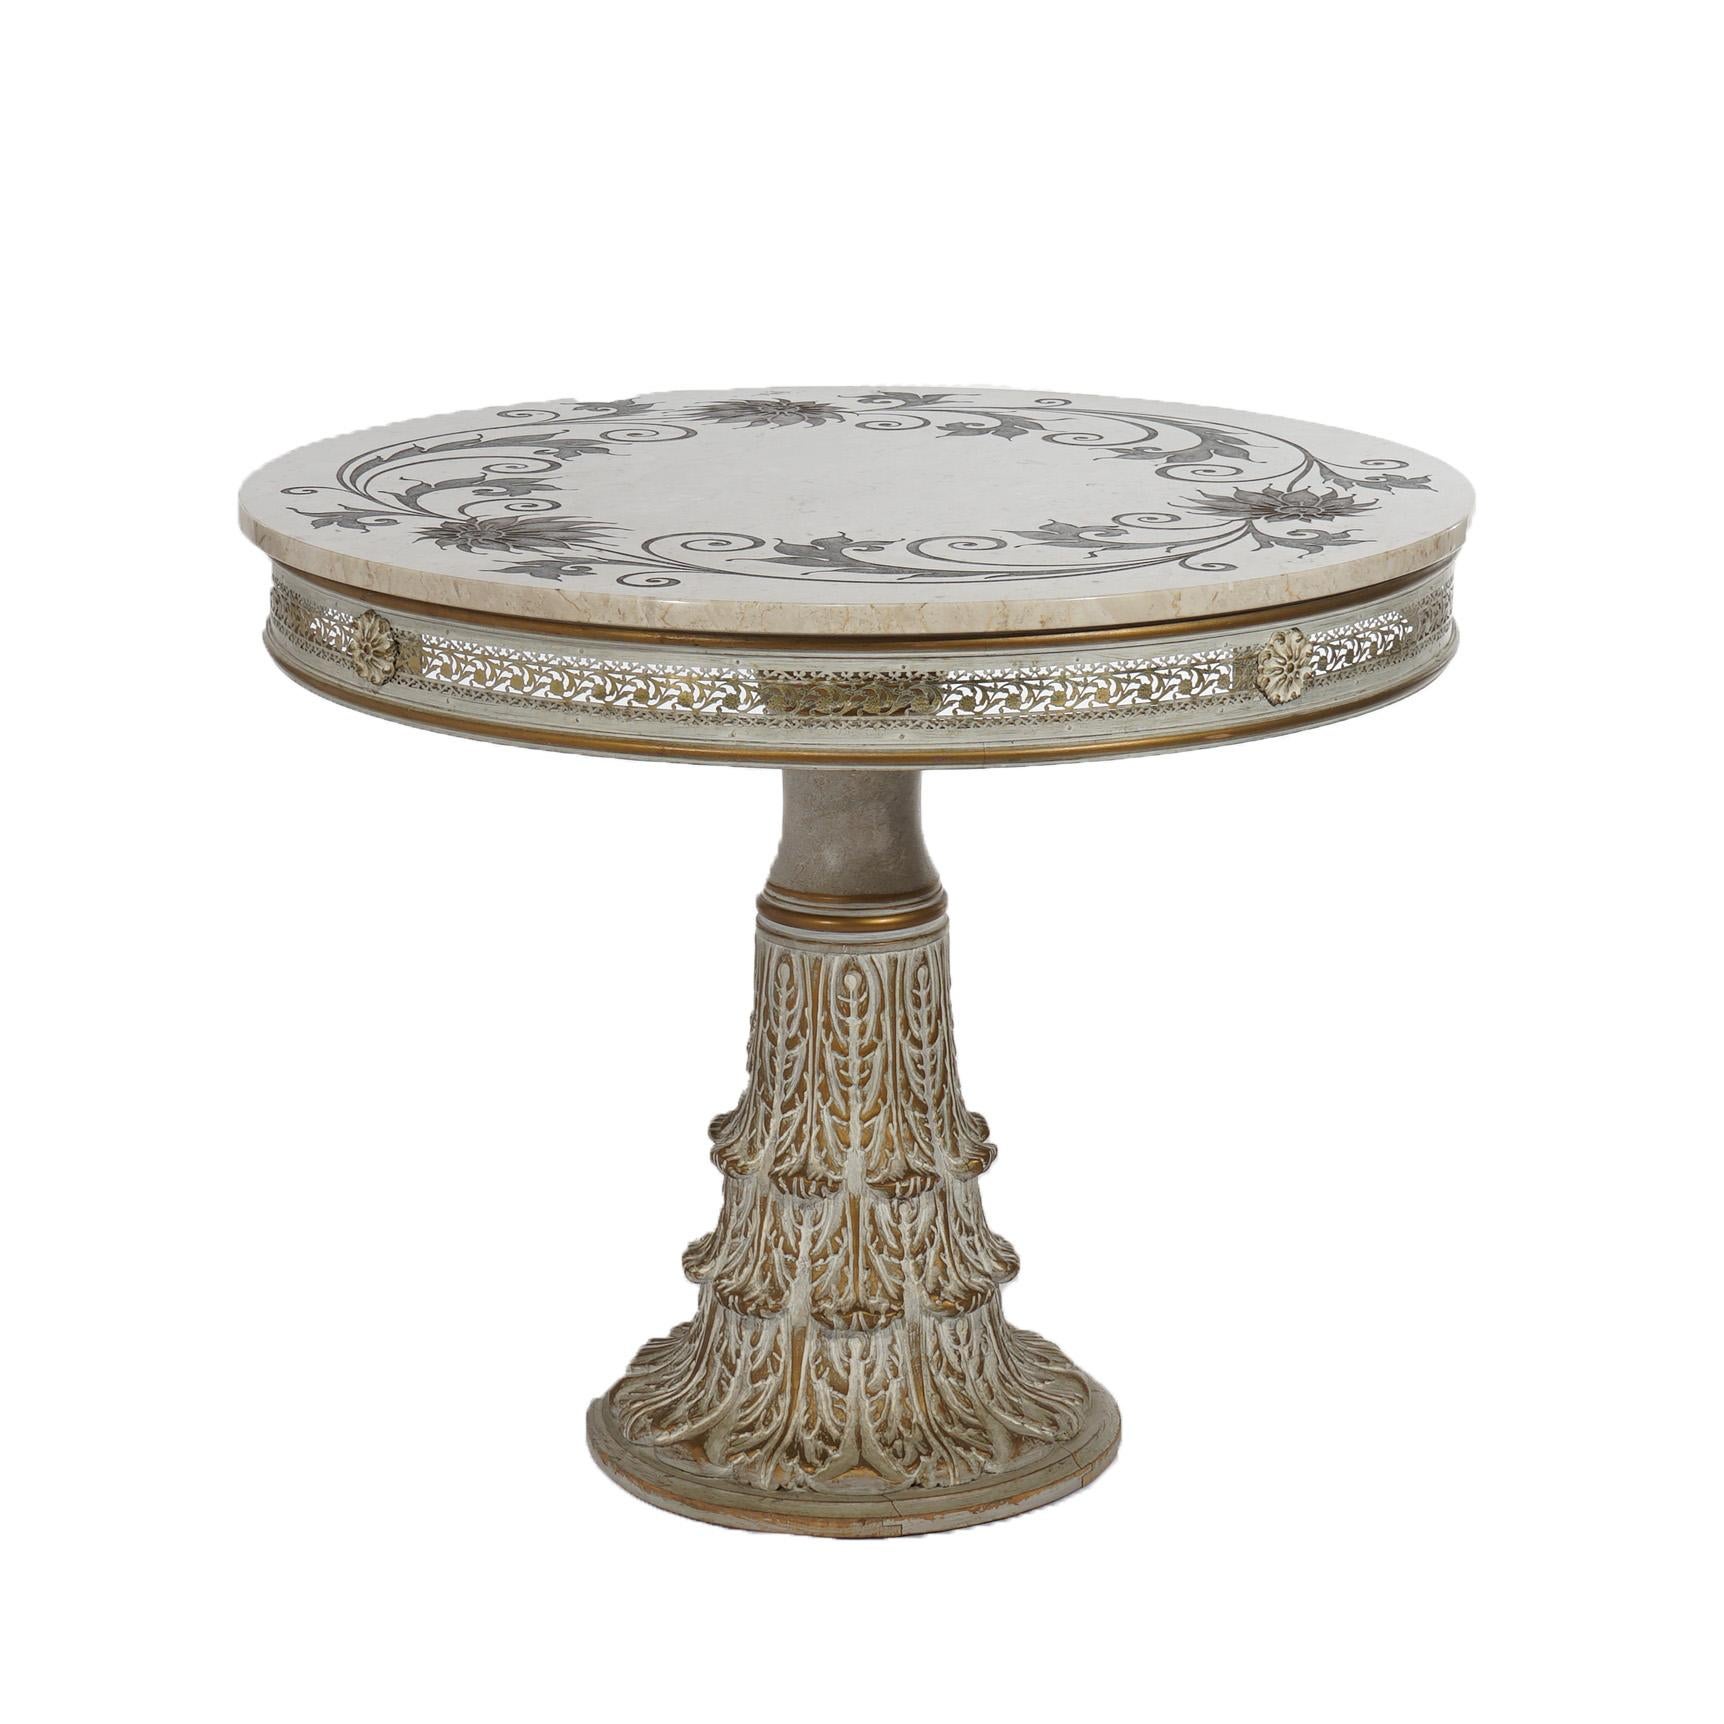 Italian Carved Wood & Foliate Inlaid Marble Center Table, 20th C 6